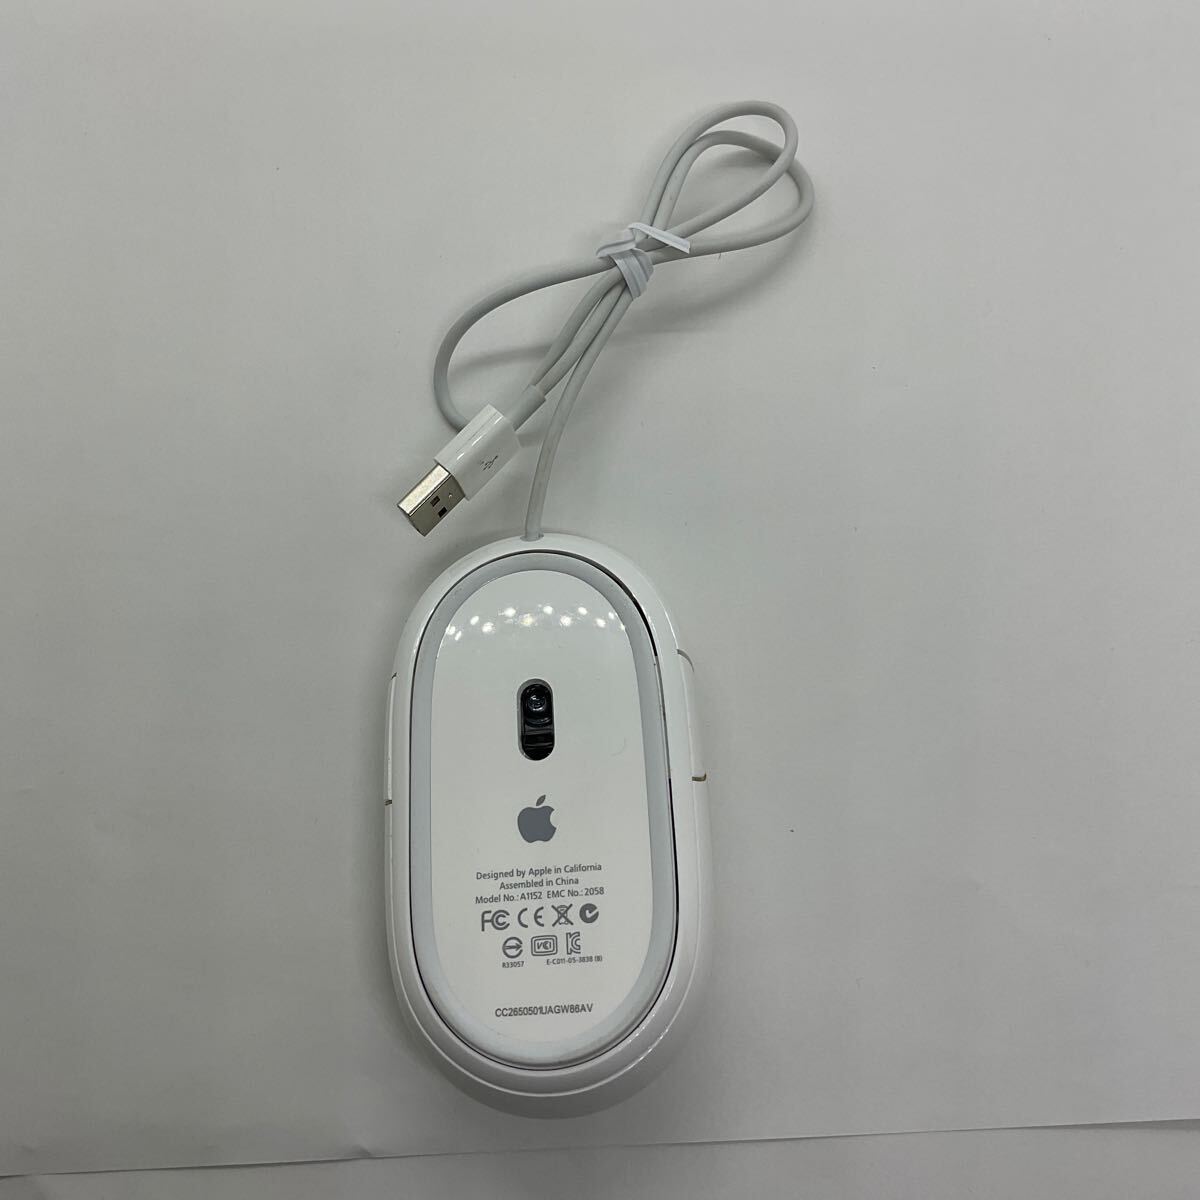 ◎ APPLE MIGHTY MOUSE A1152 有線マウス 5個セット　動作品　純正品_画像2